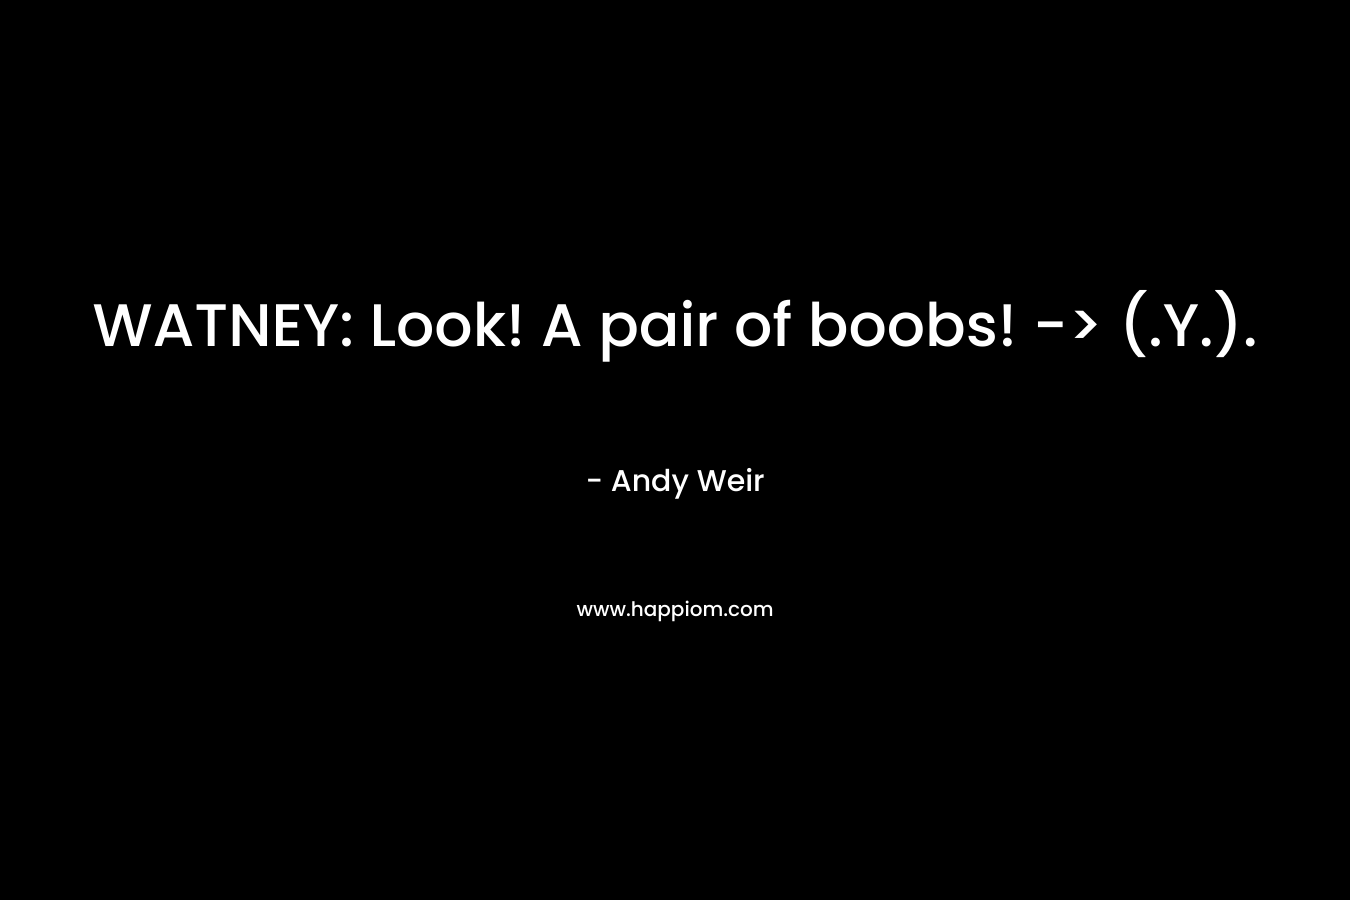 WATNEY: Look! A pair of boobs! -> (.Y.).” decoding=”async” loading=”lazy”></center></p><p>WATNEY: Look! A pair of boobs! -> (.Y.).<br />– Andy Weir</p><div class=